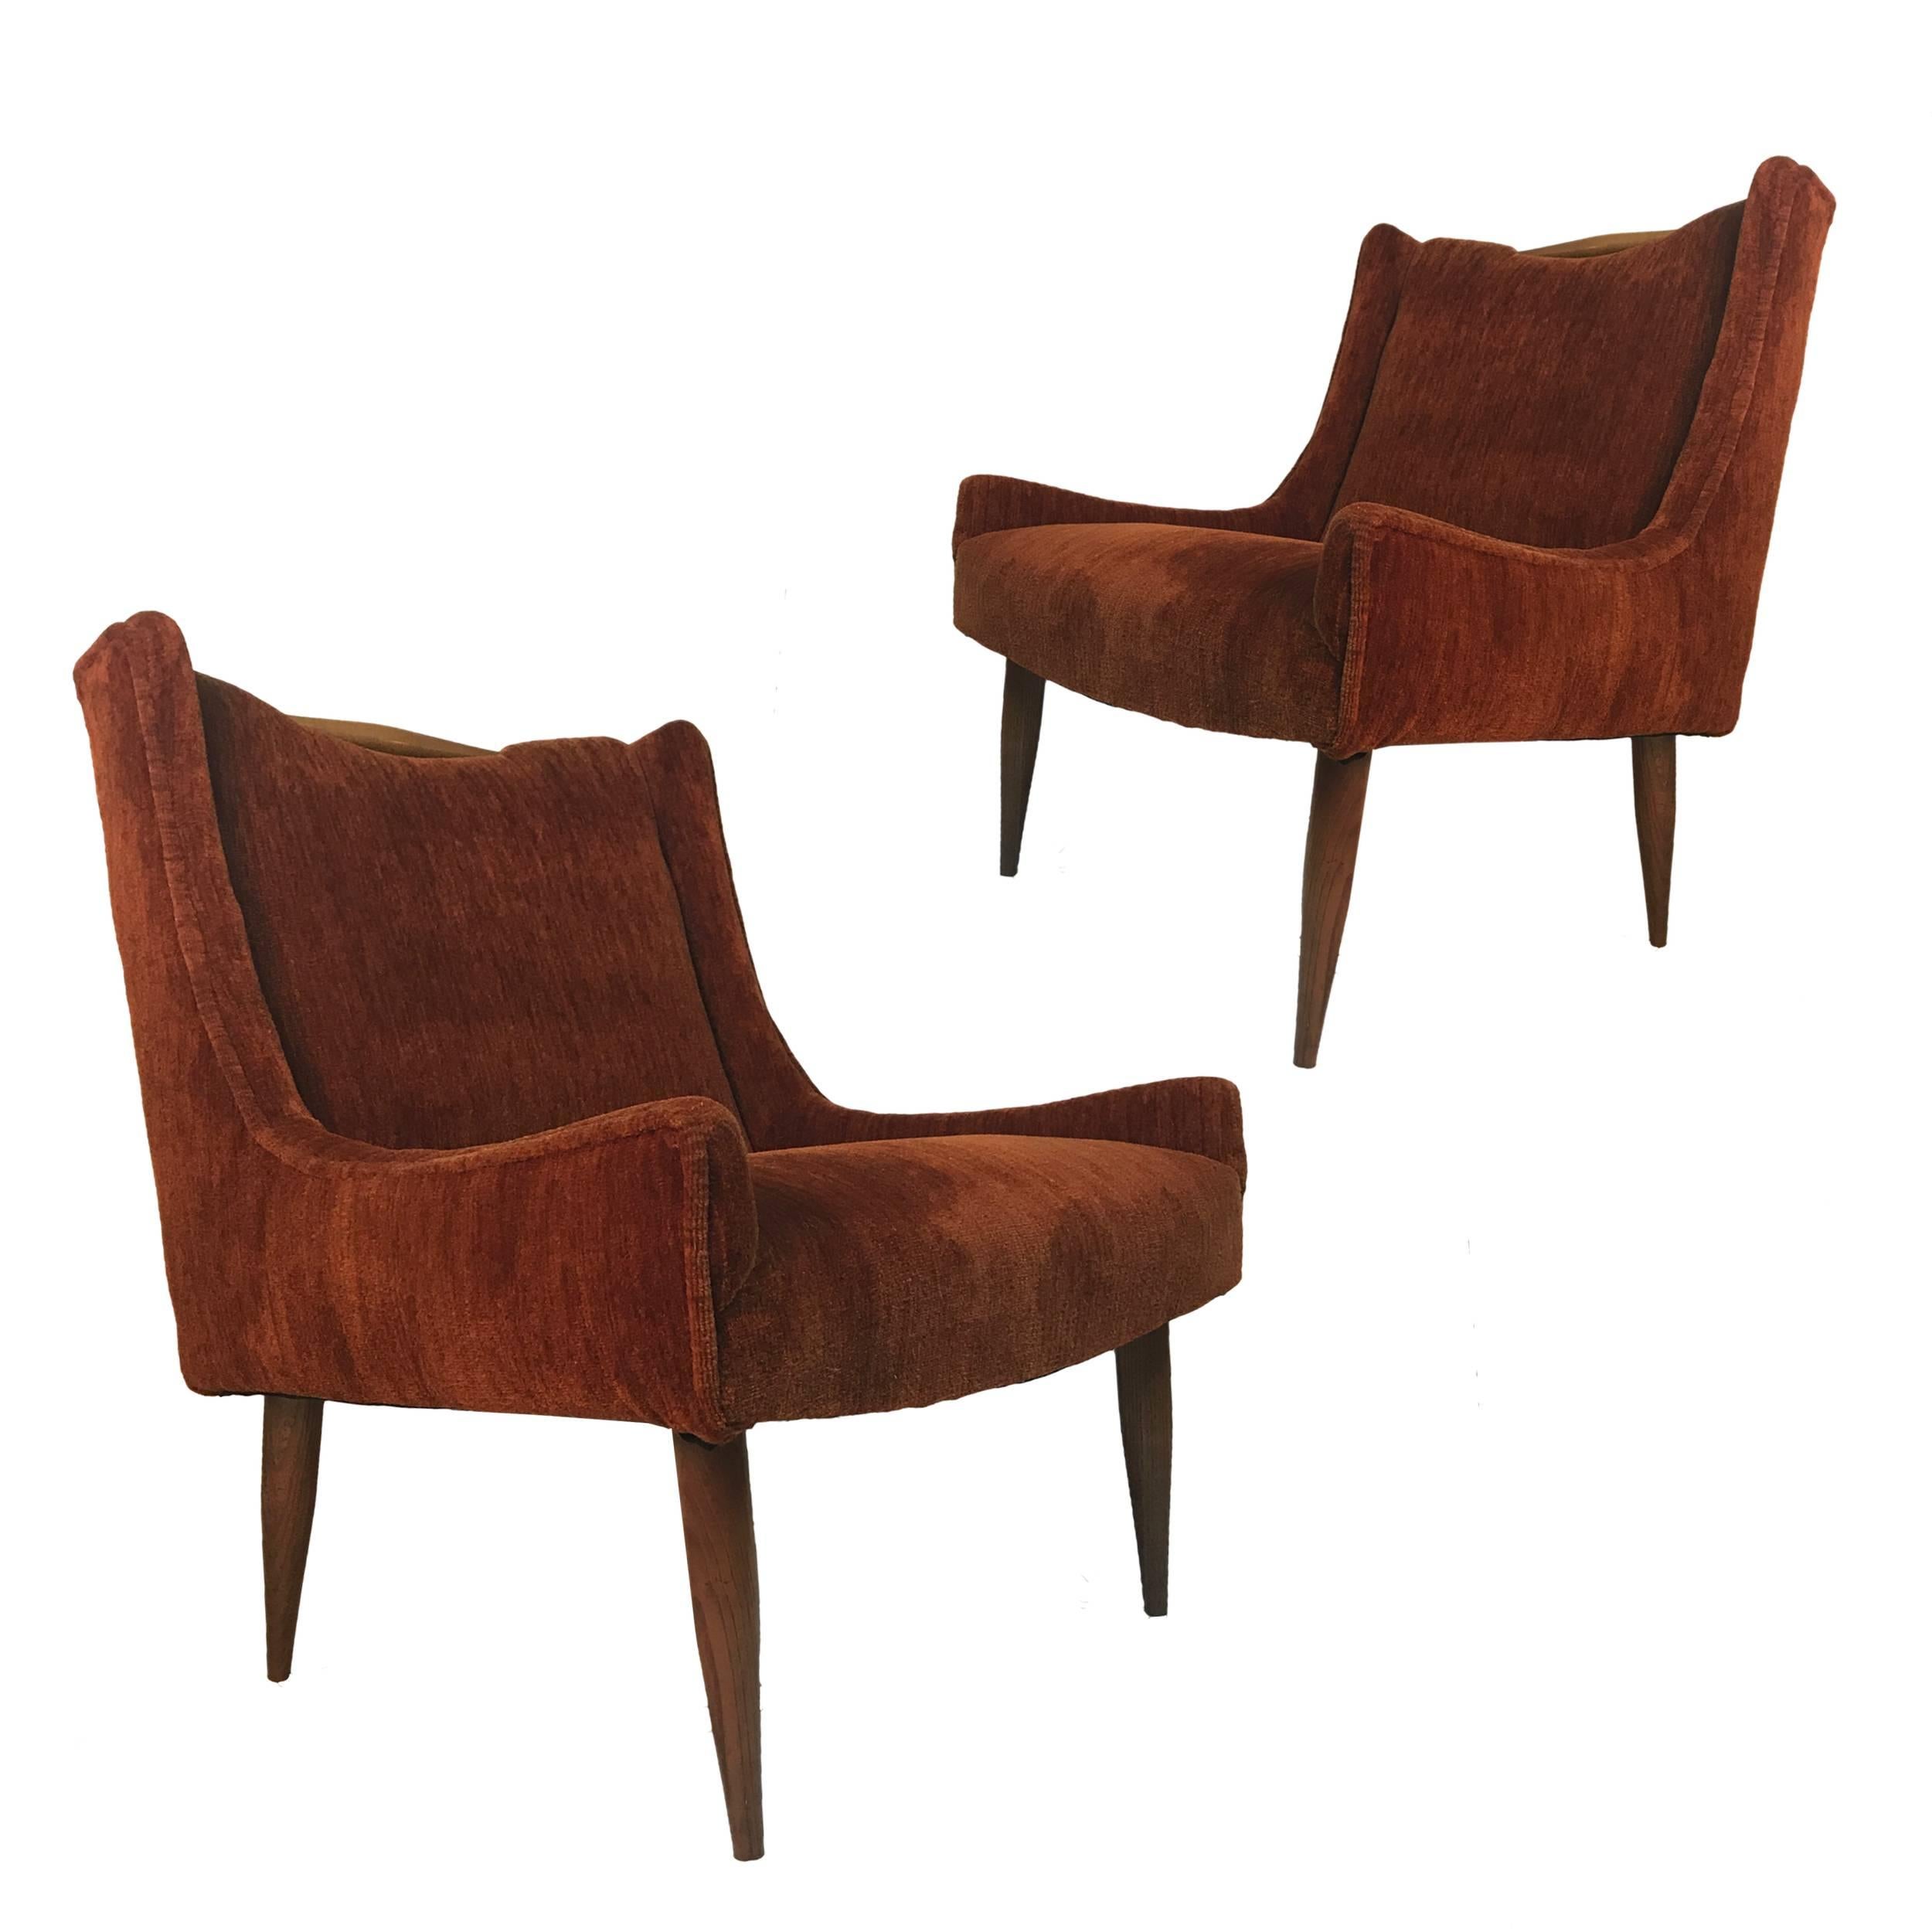 Sculptural Midcentury Harvey Probber Slipper Lounge Chairs with Walnut Detail